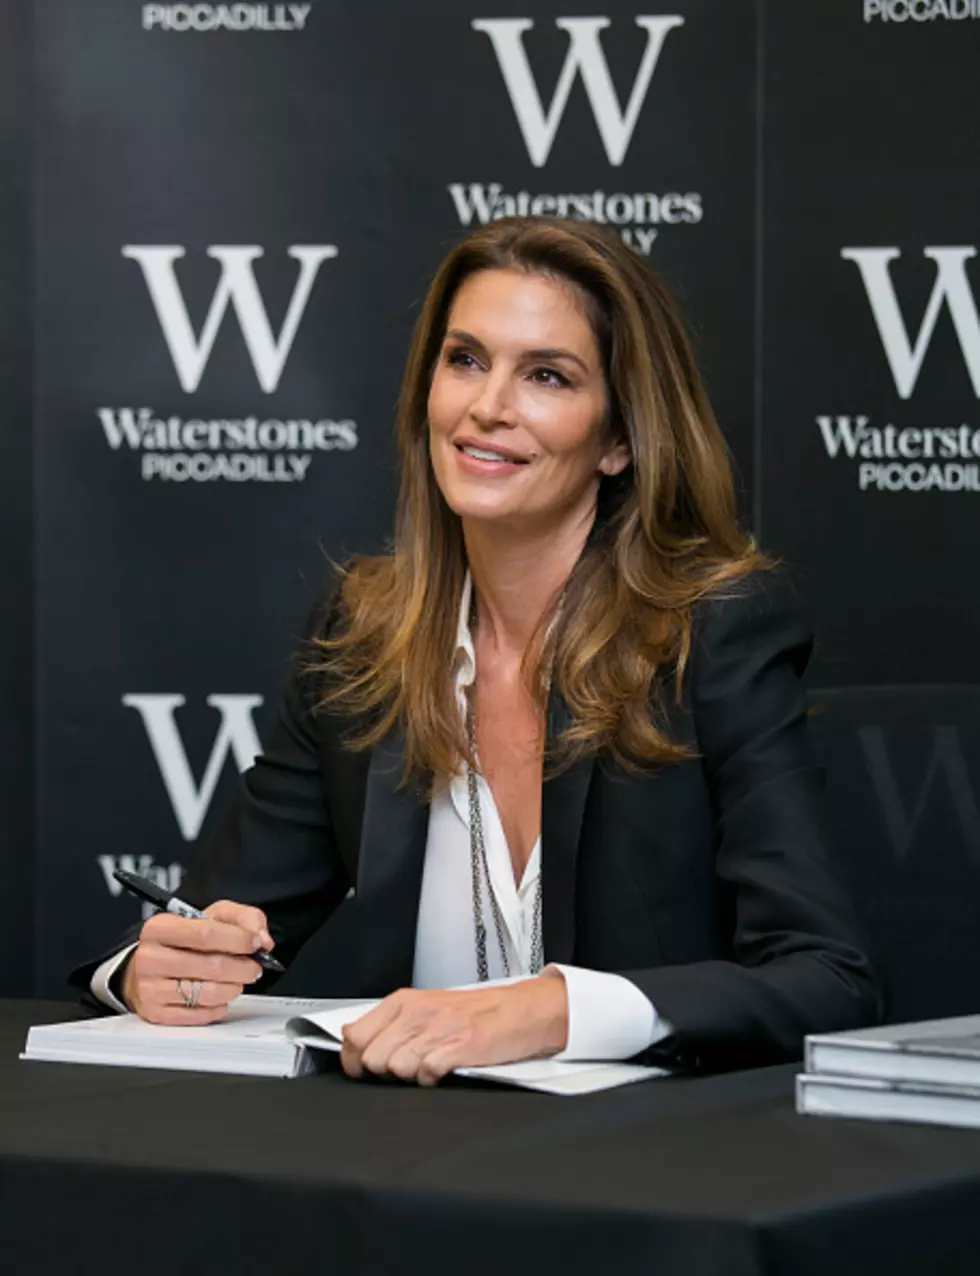 5 Things You Didn’t Know About DeKalb’s Cindy Crawford [List]